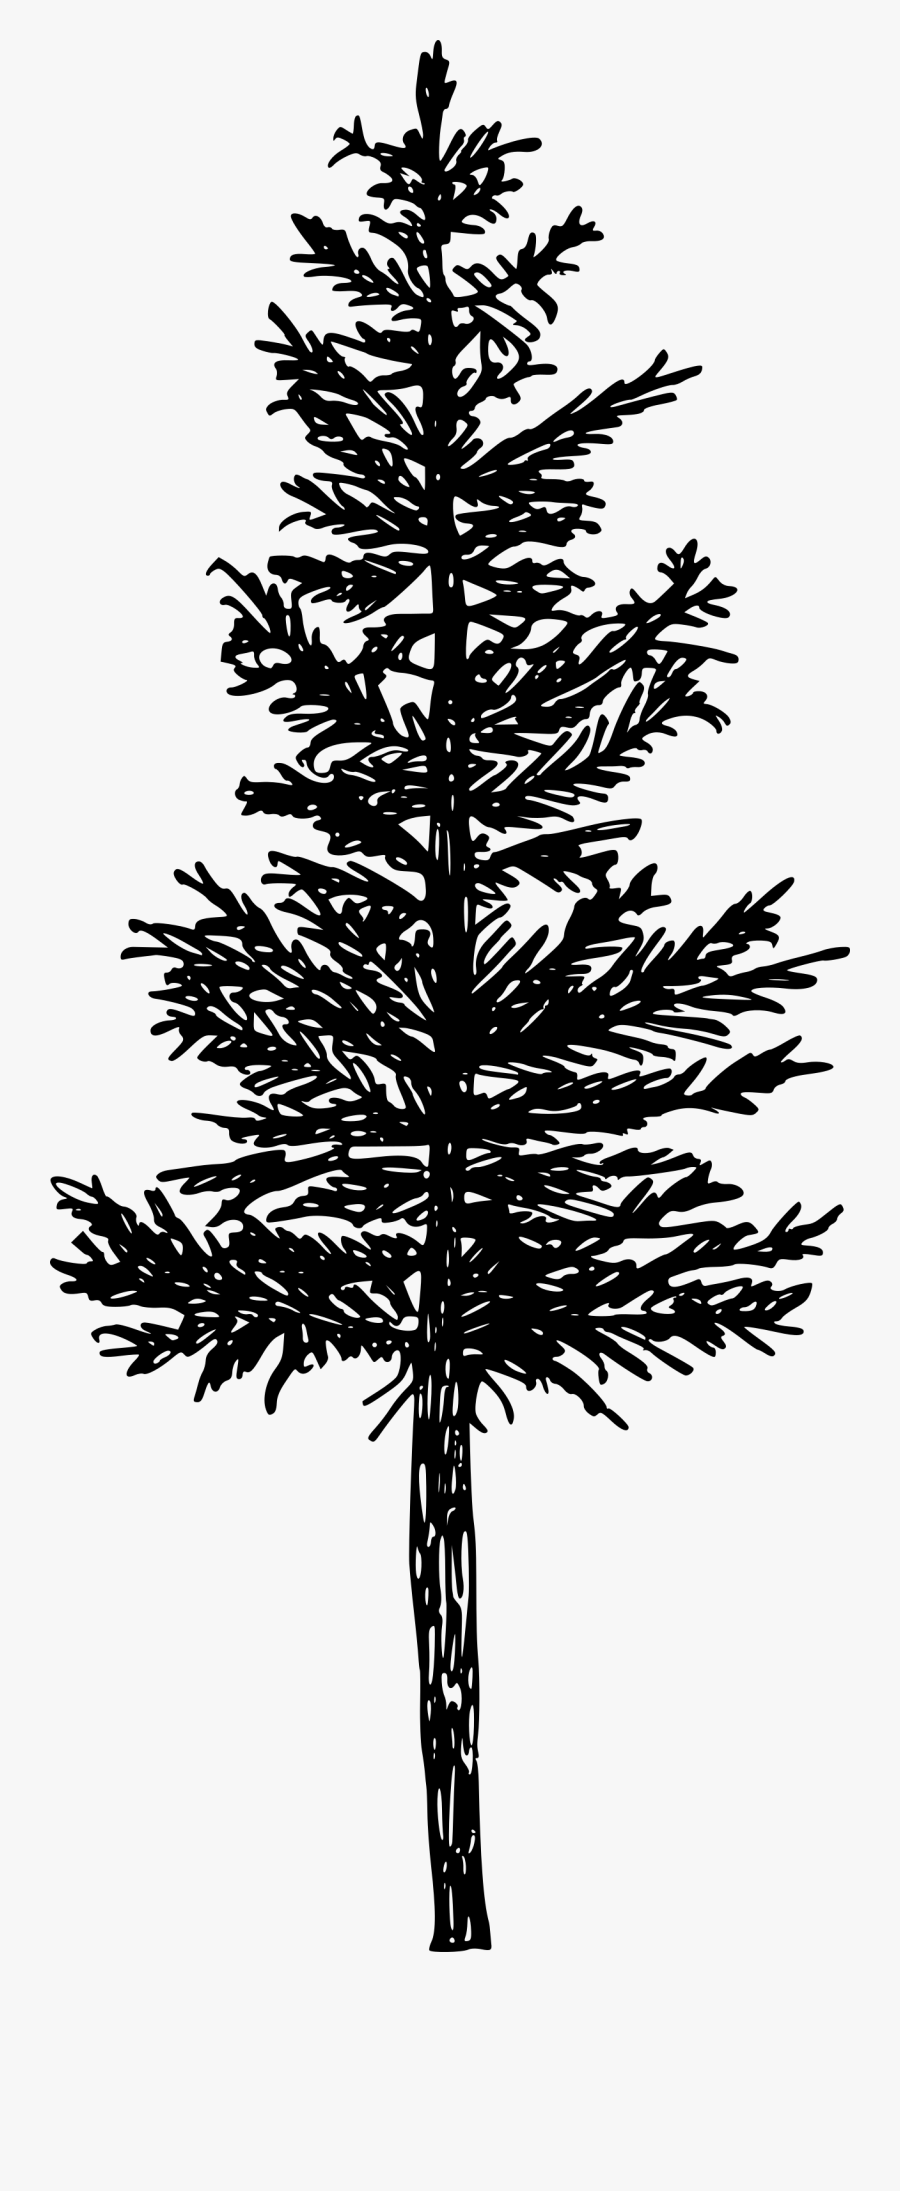 Pine Tree Silhouette Png -free Download - Pine Tree Silhouette Png, Transparent Clipart